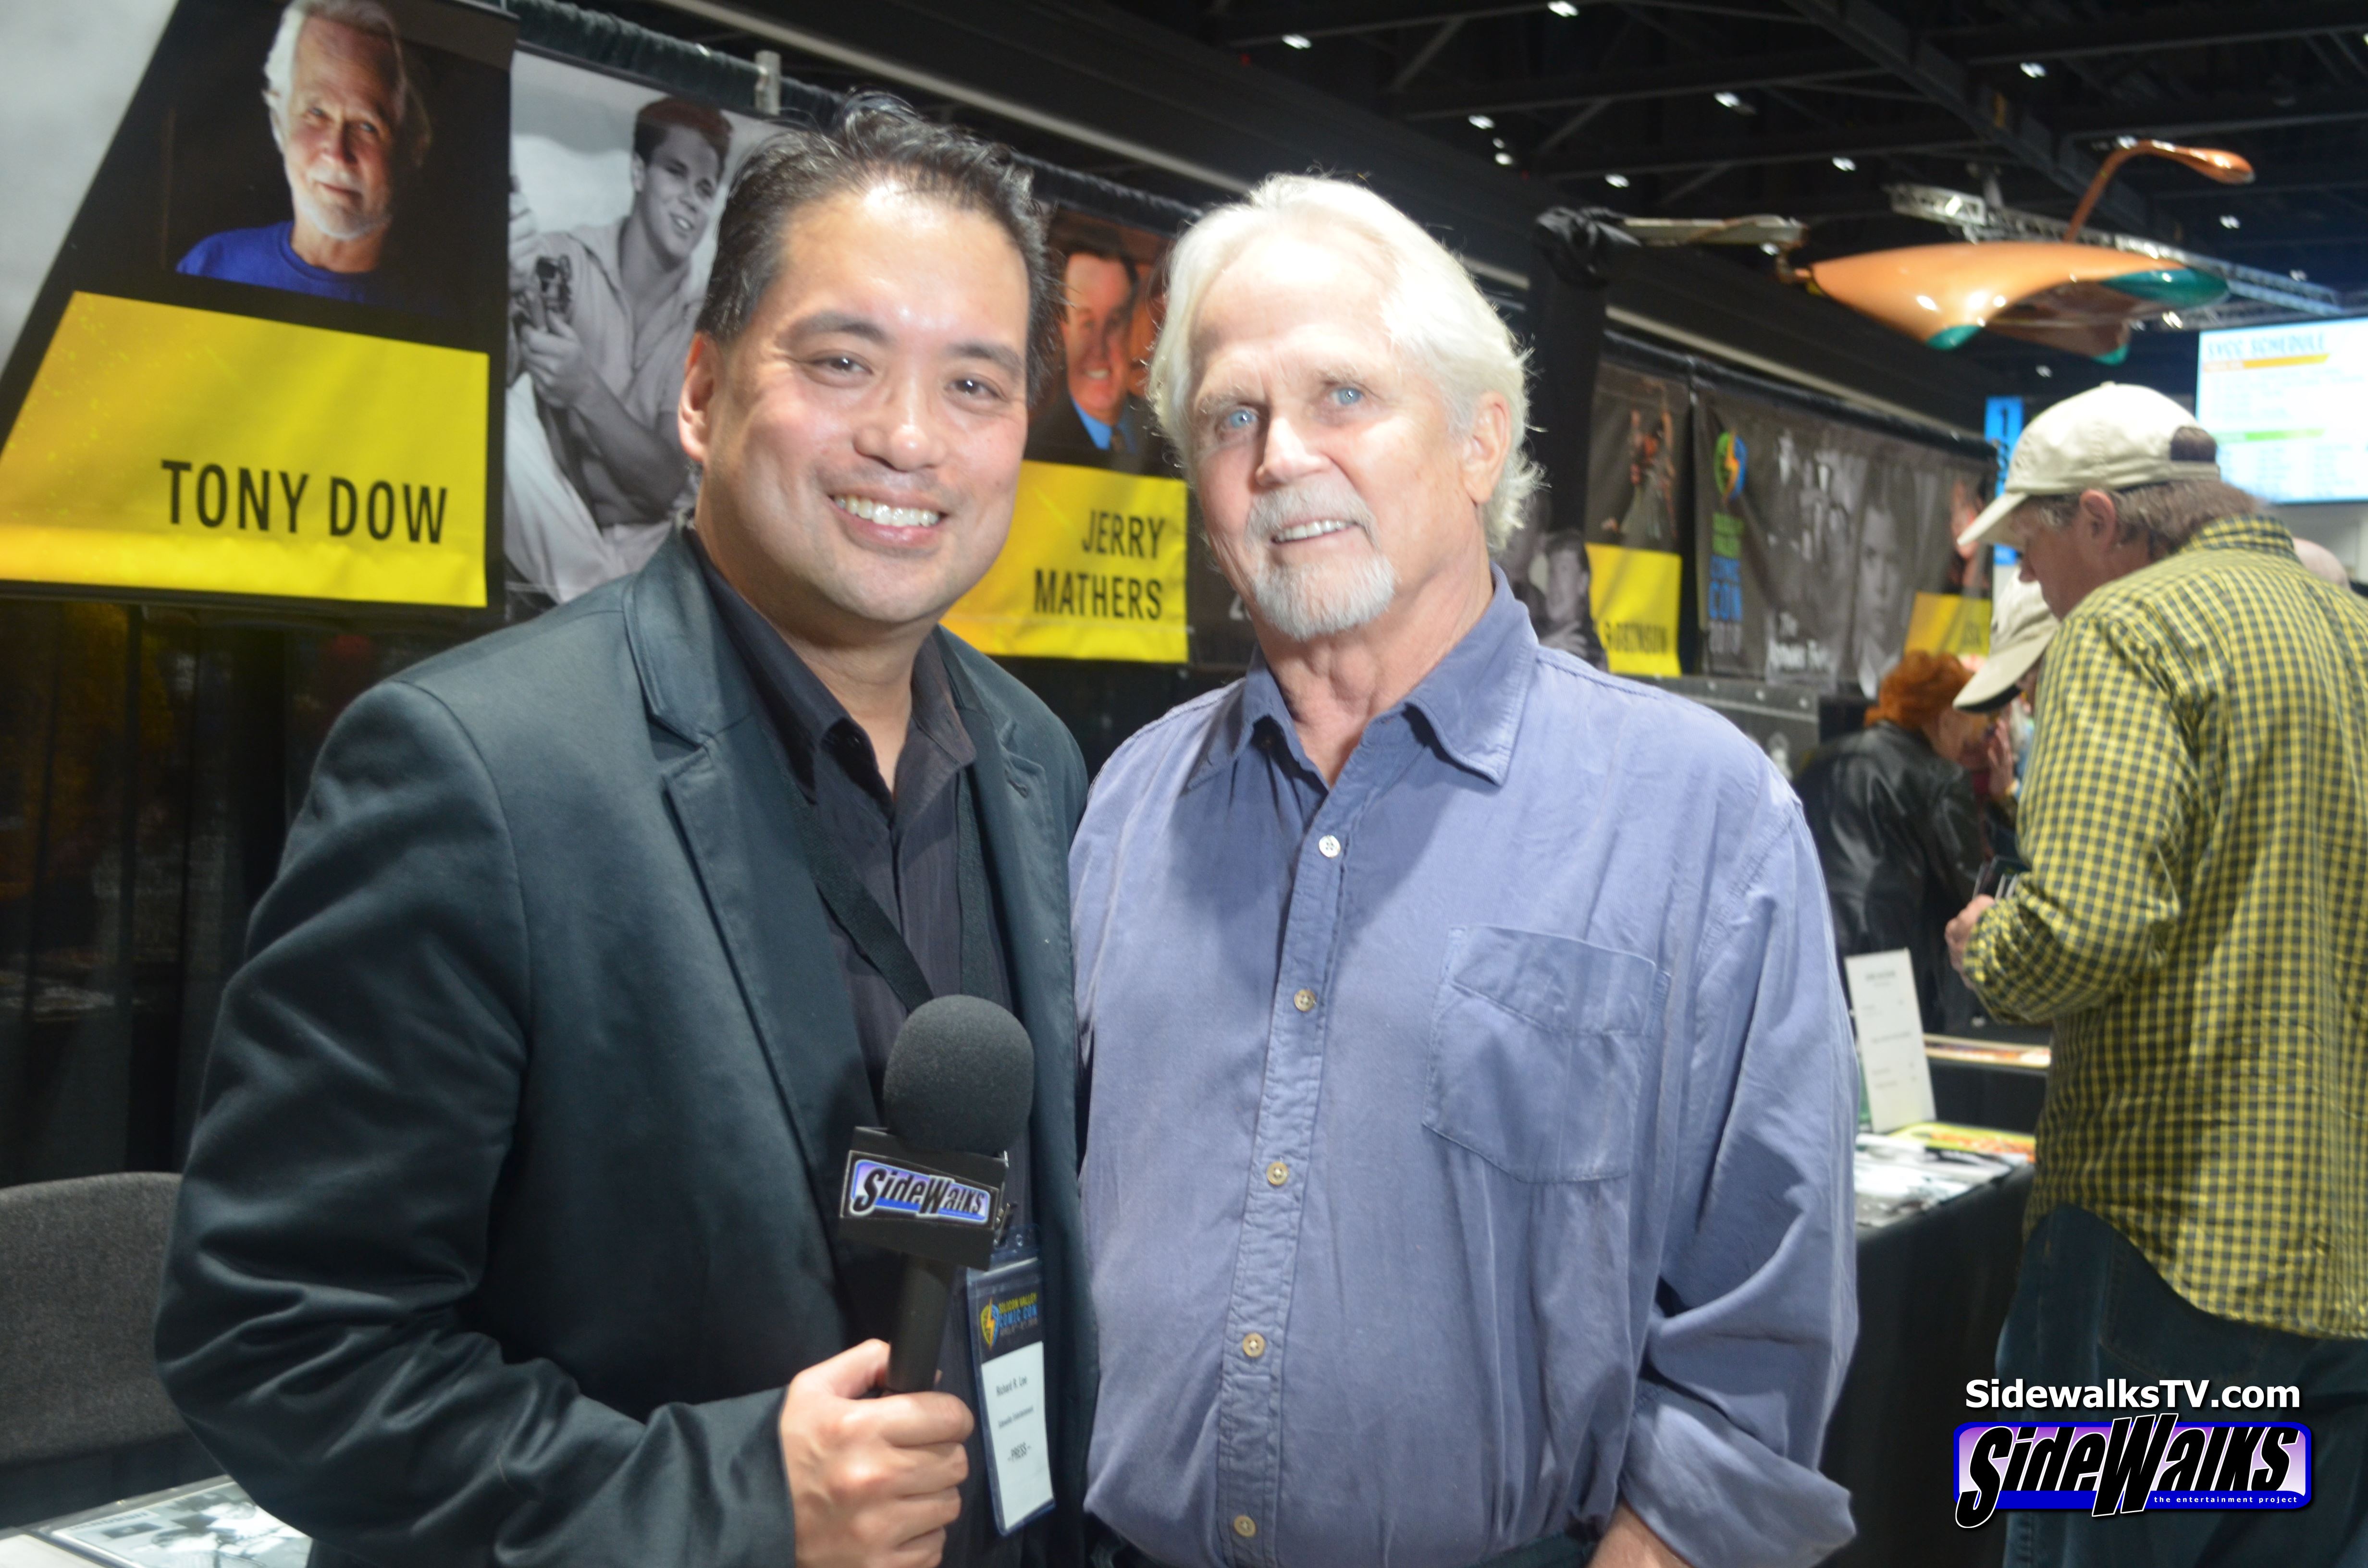 Richard R. Lee stands with Tony Dow